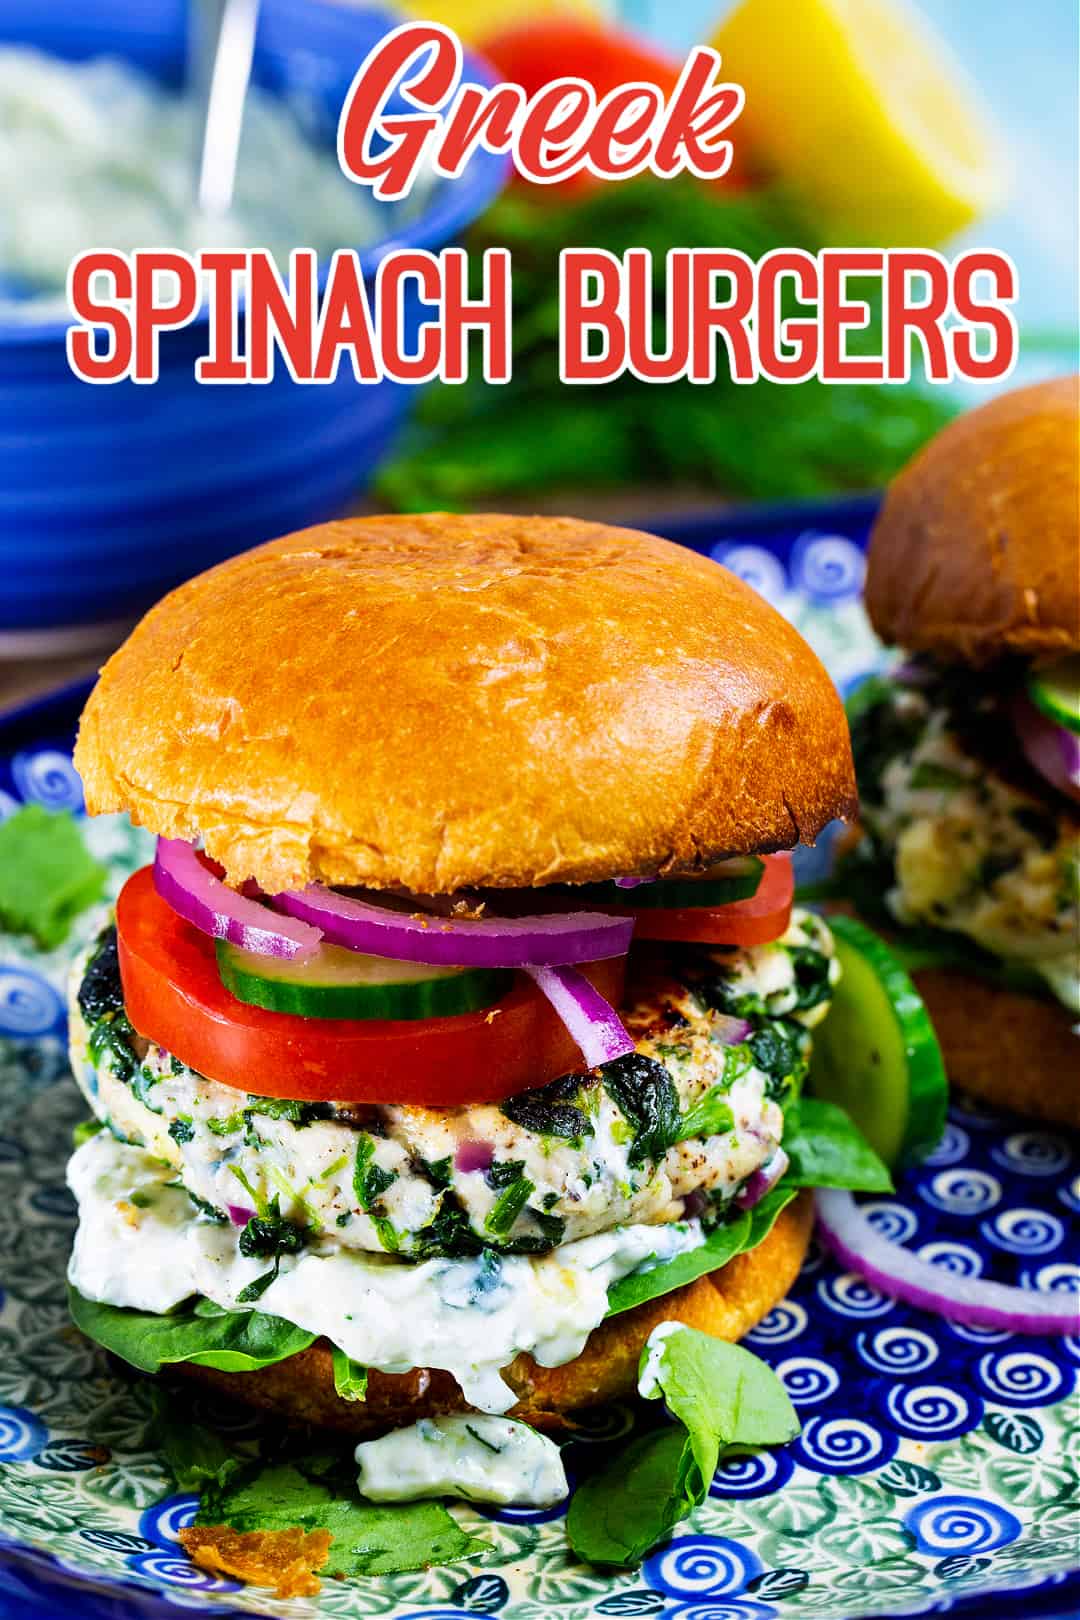 Greek Spinach Burgers on buns.